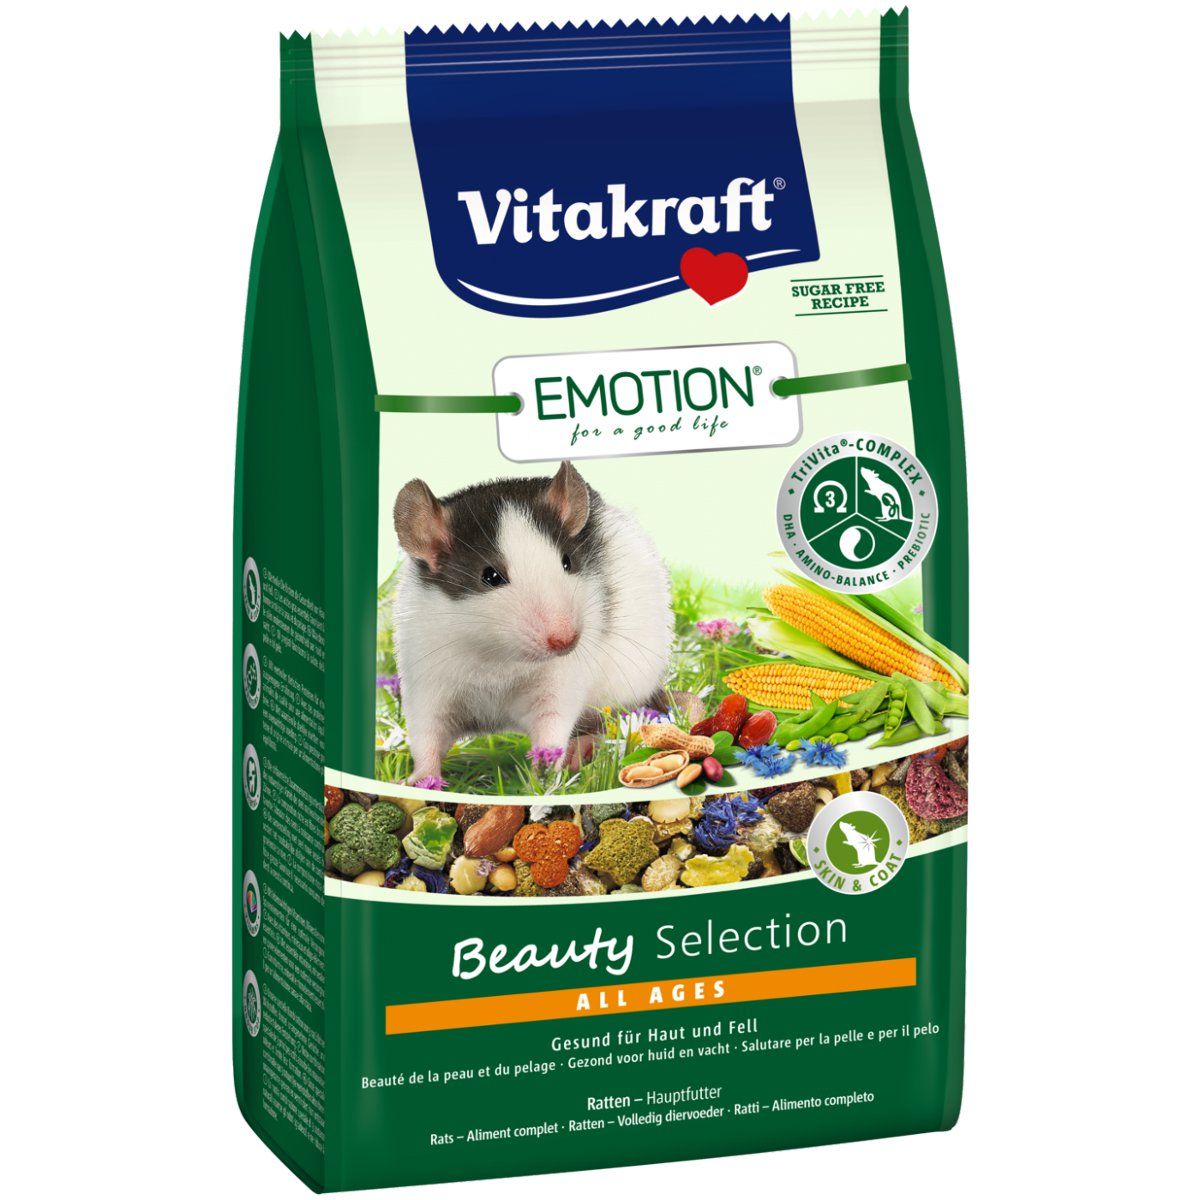 Vitakraft Emotion Beauty All Ages, Ratte